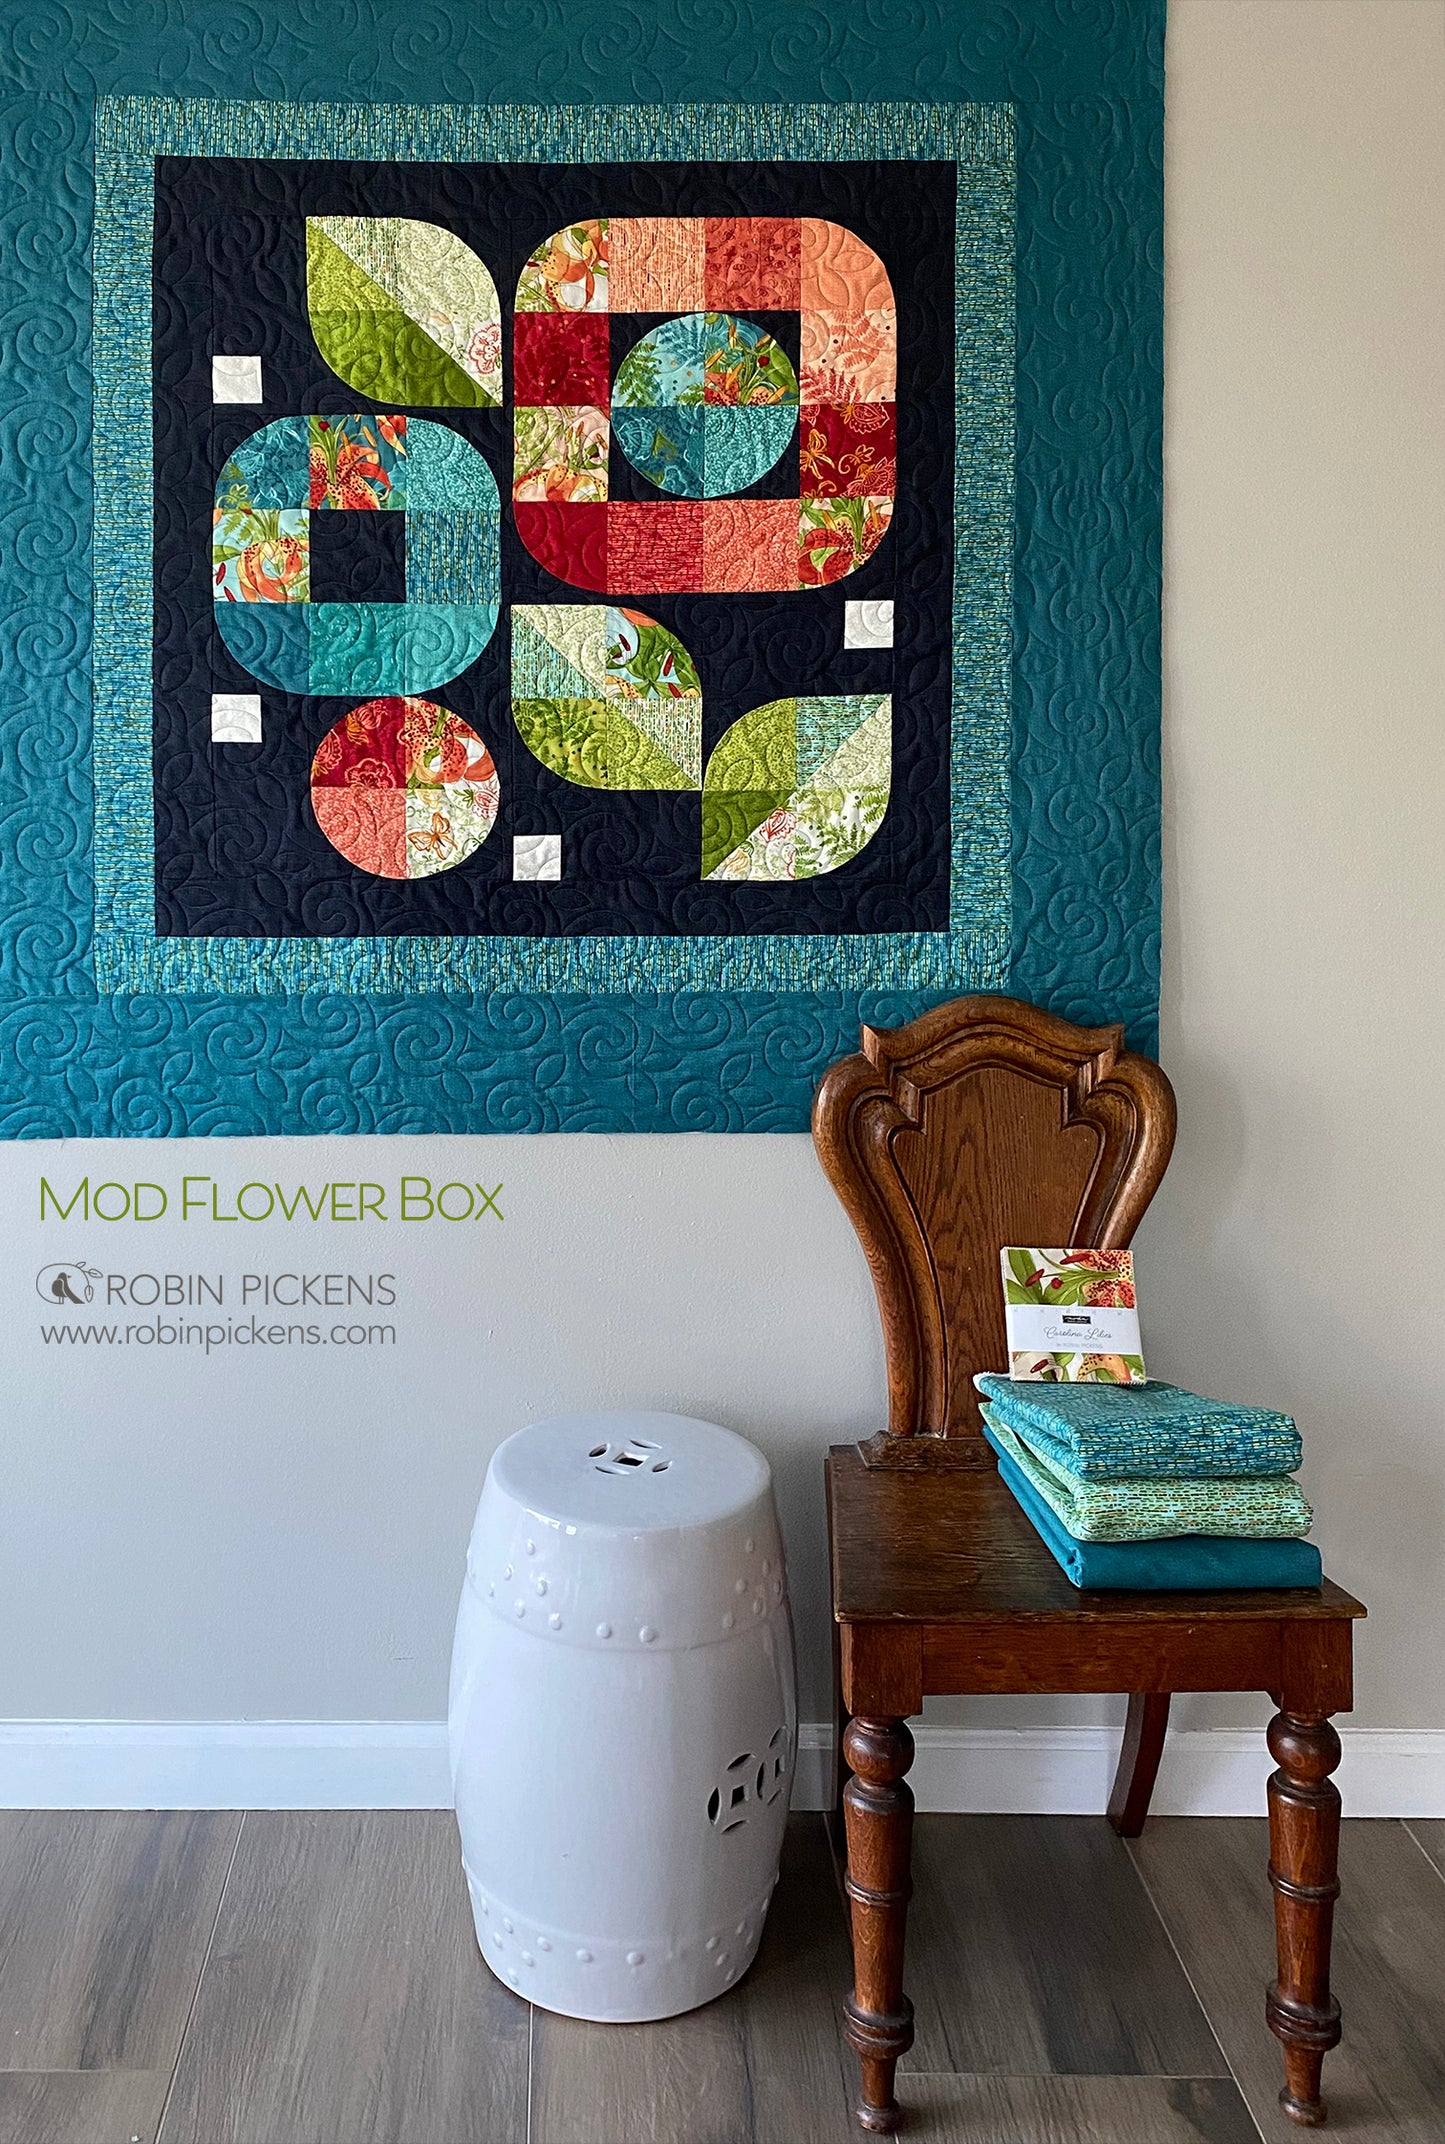 Mod Flower Box quilt pattern printed booklet